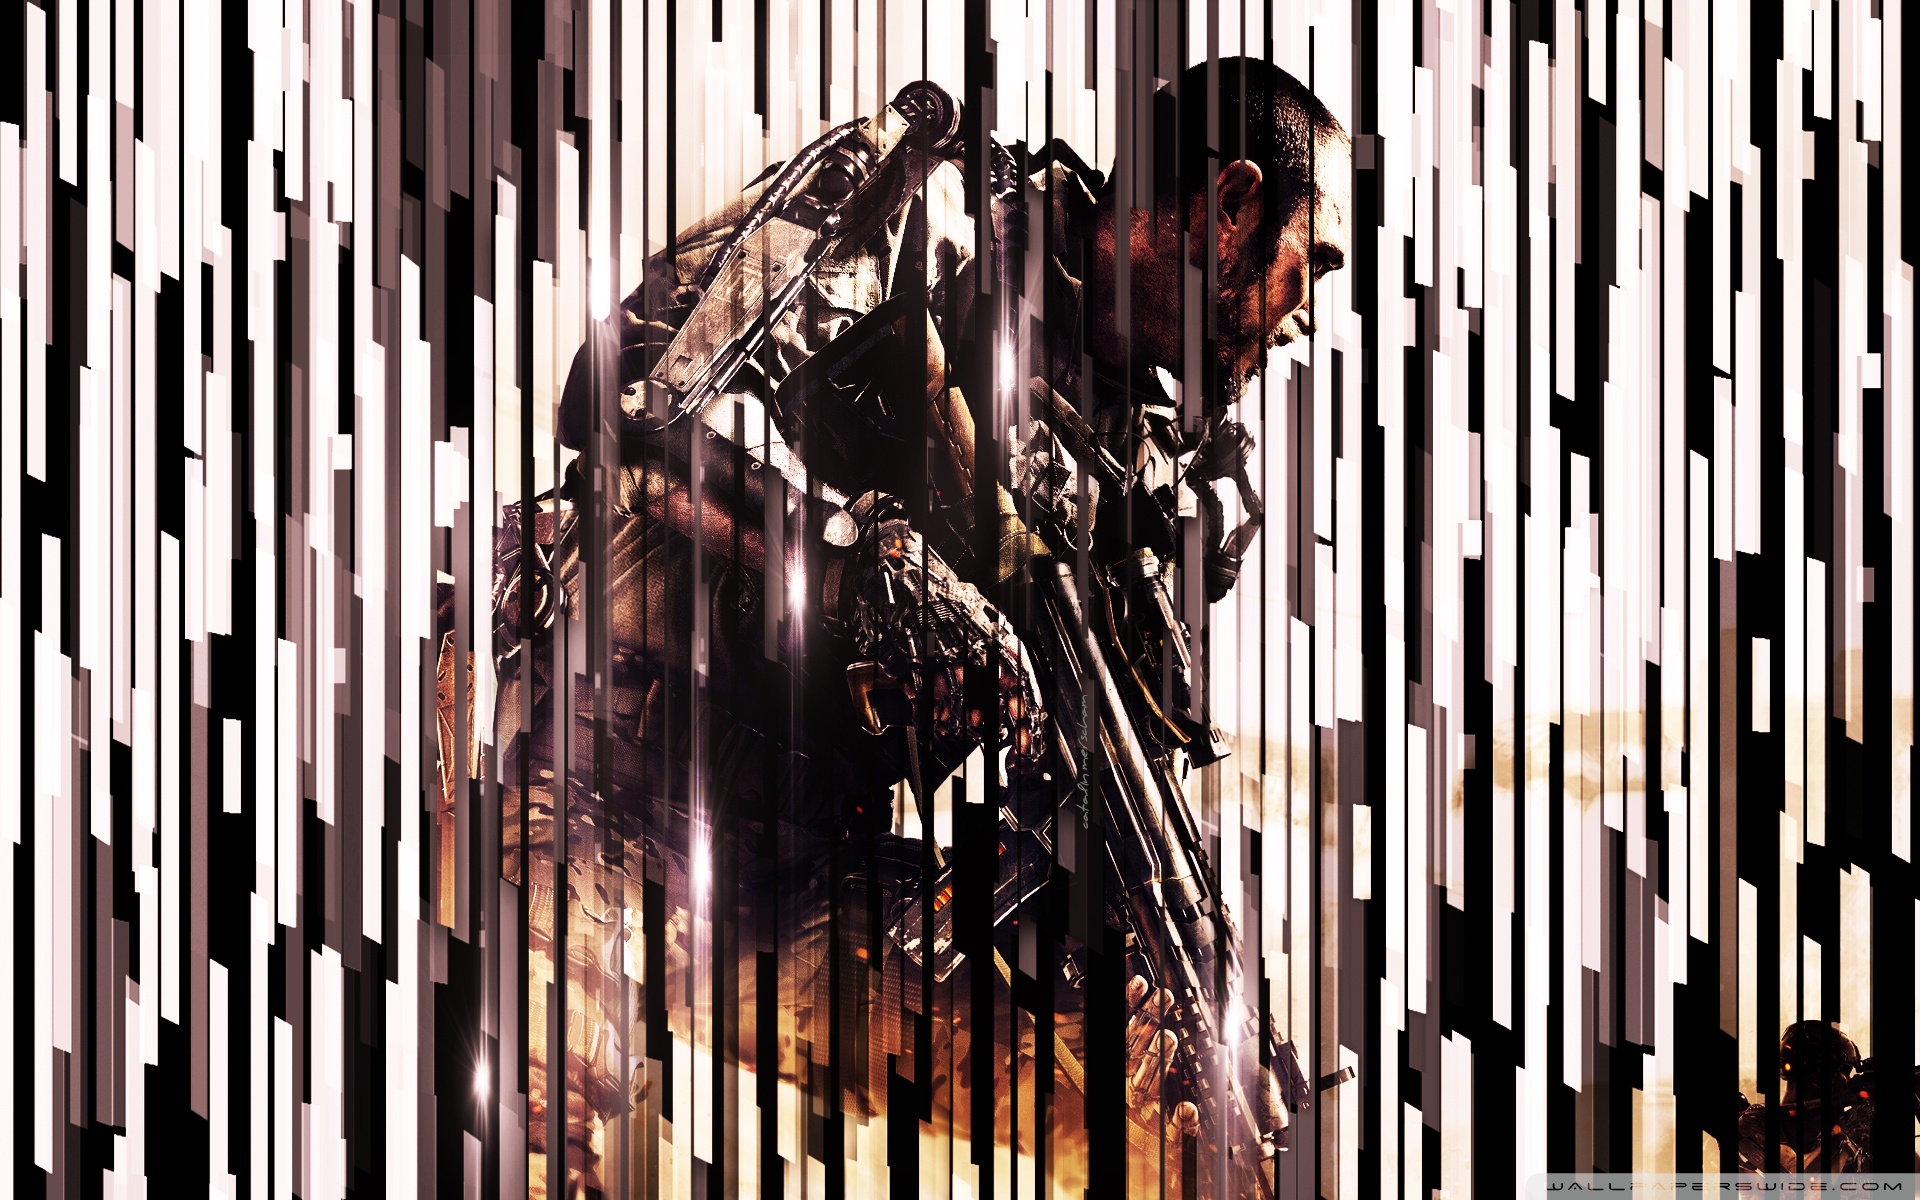 Call Of Duty Advanced Warfare Wallpaper Collection For